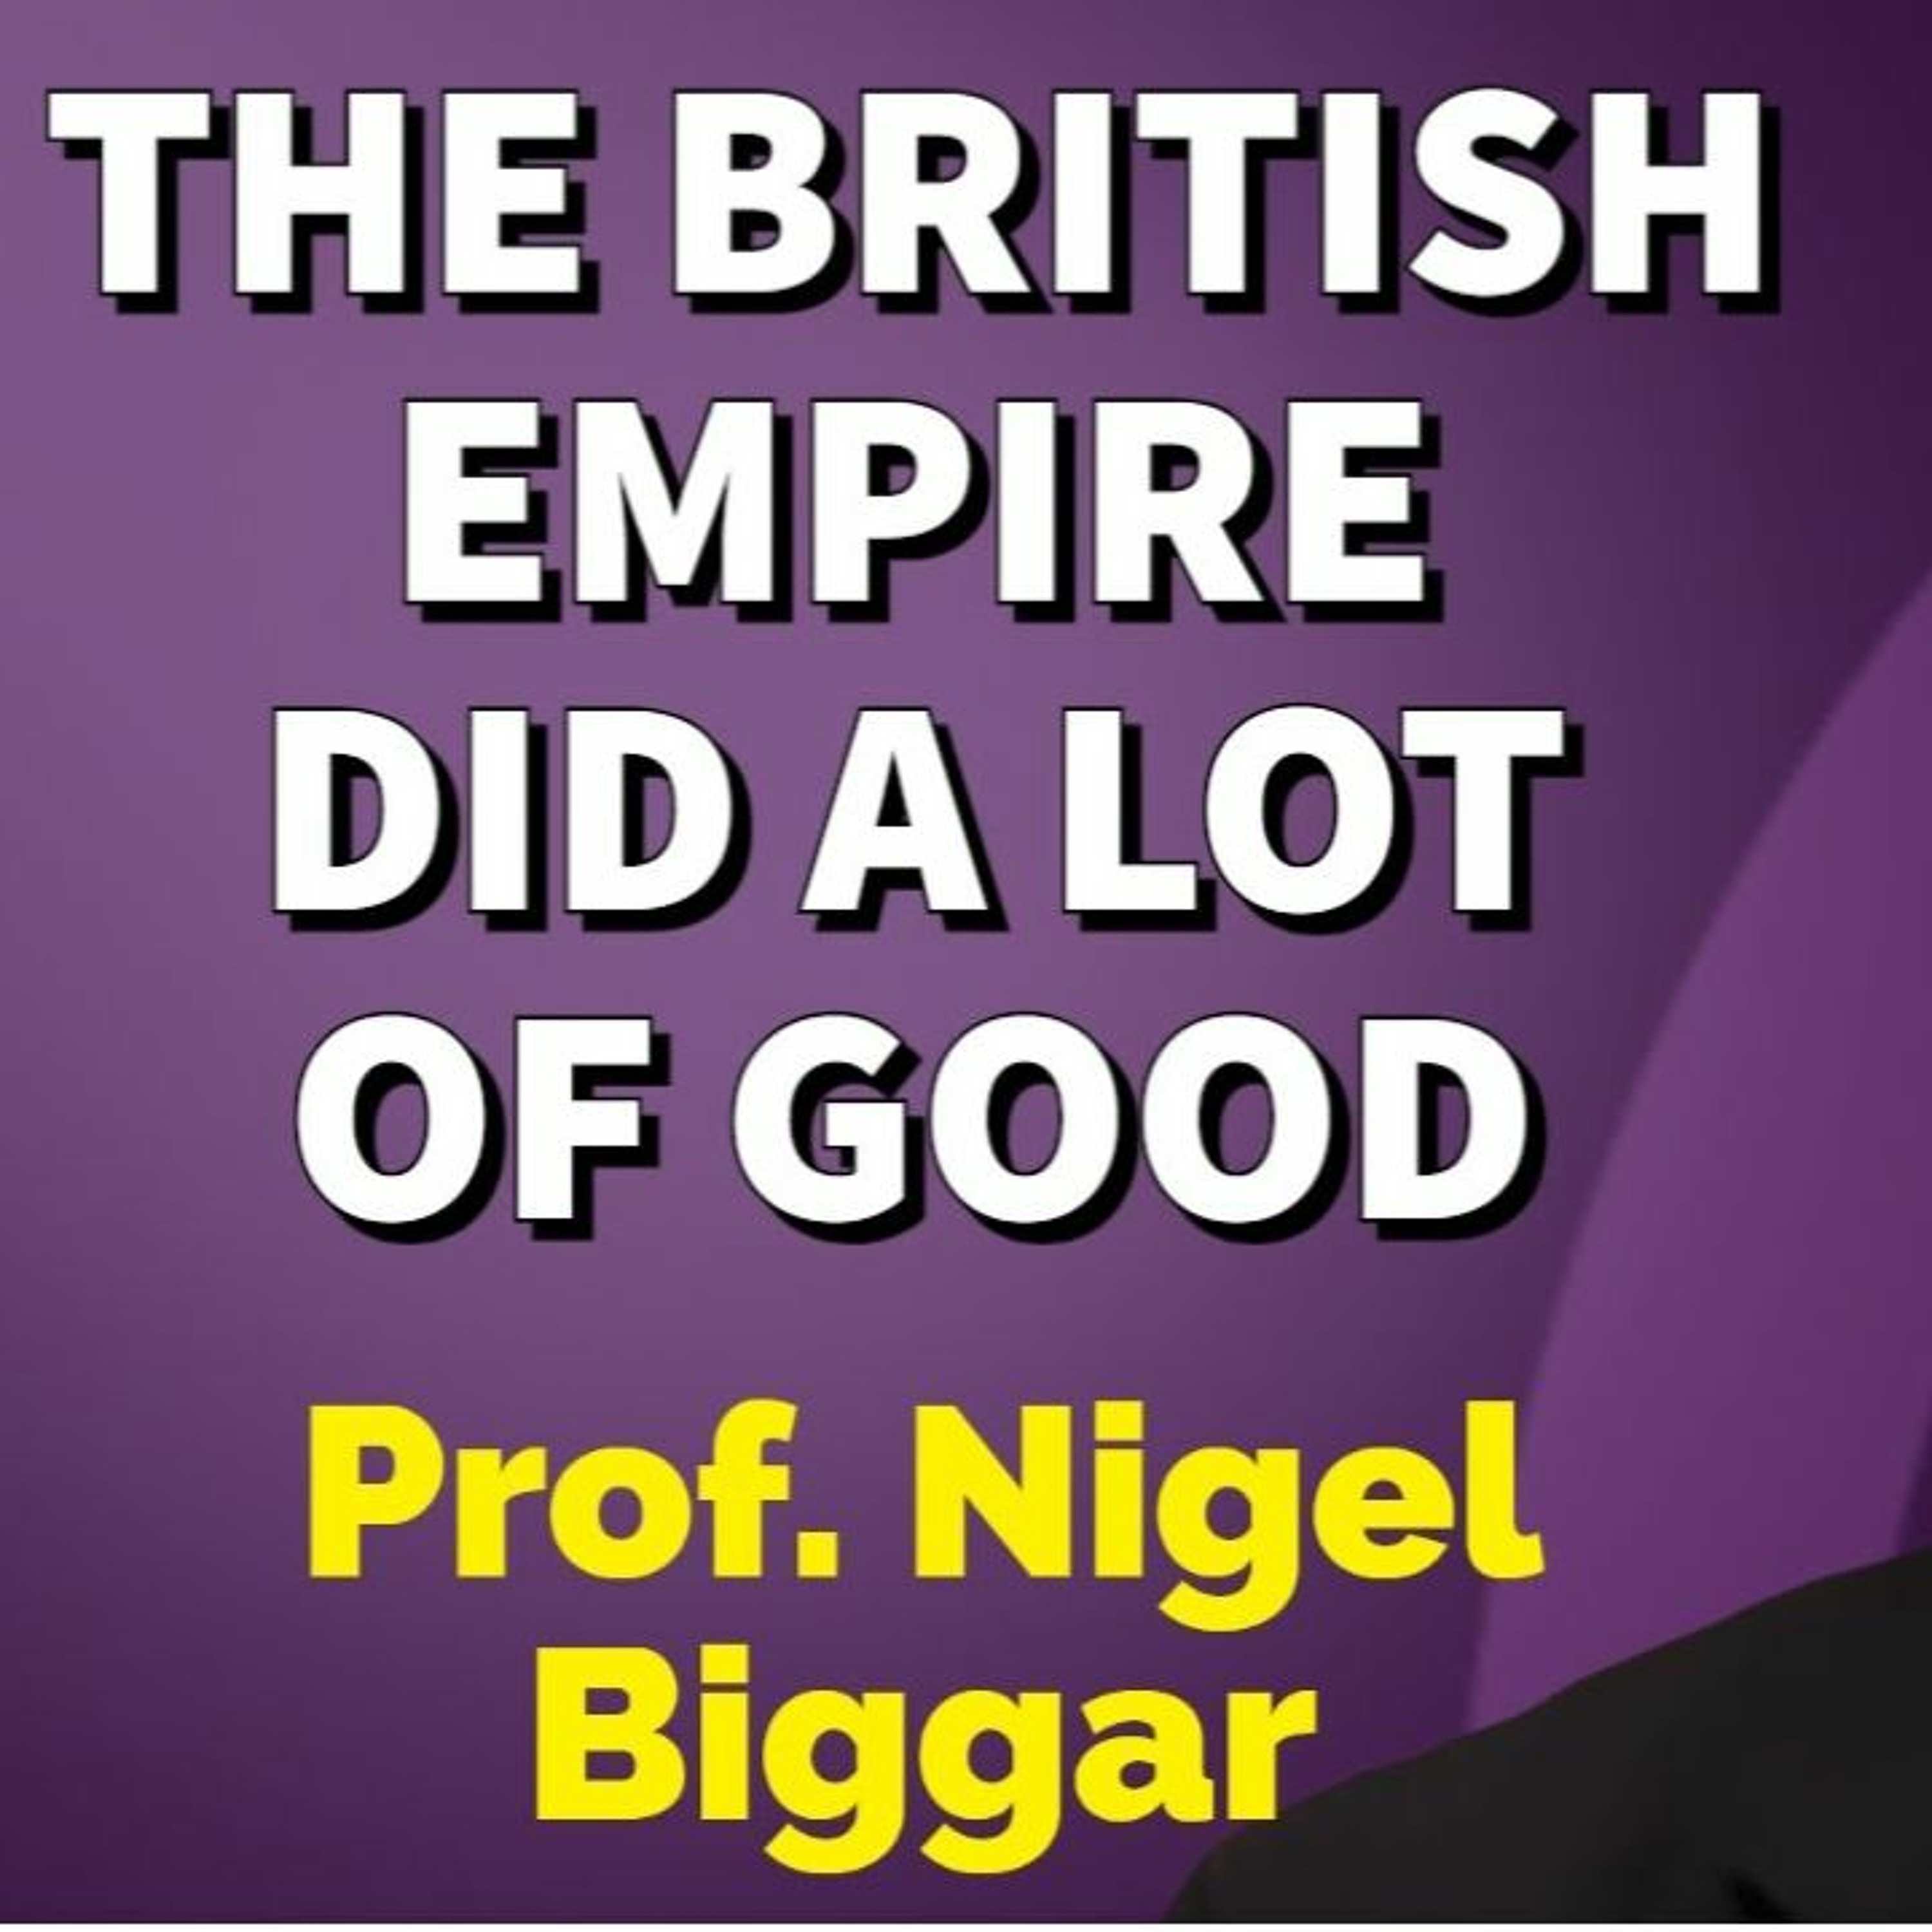 The Morality of the British Empire - A Balanced View of Colonialism